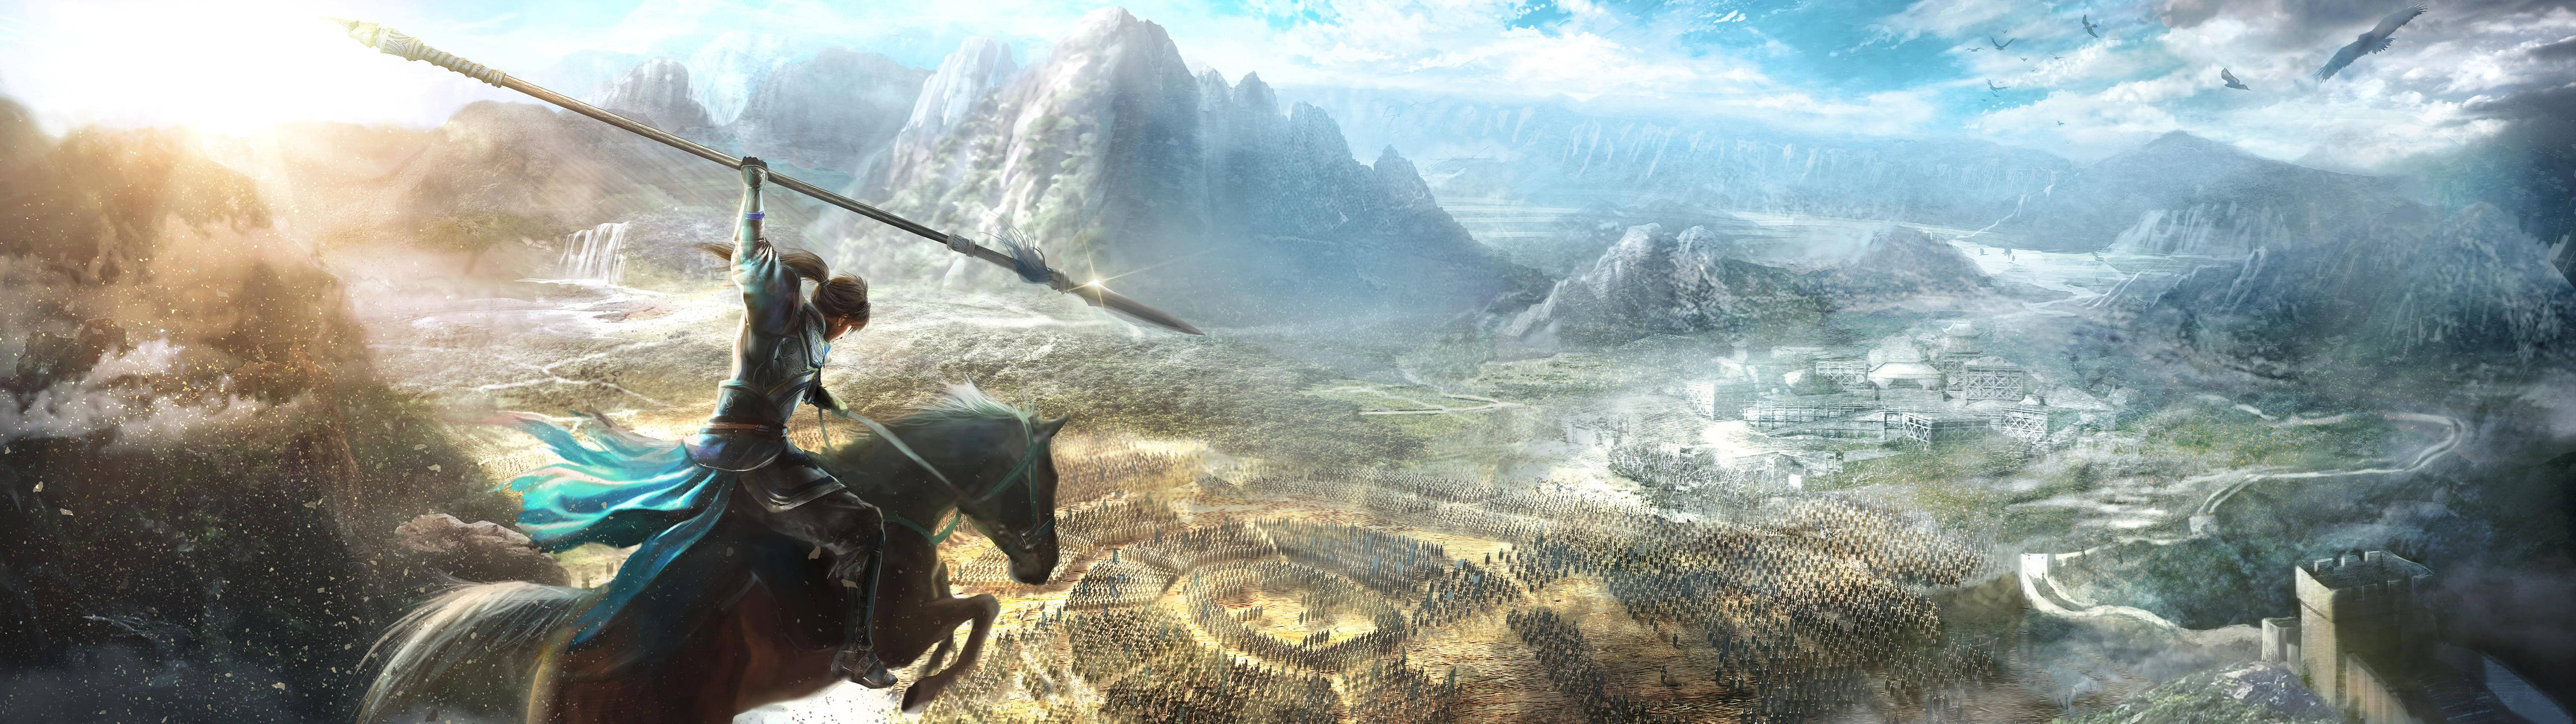 5120x1440 Game Dynasty Warriors 9 Background